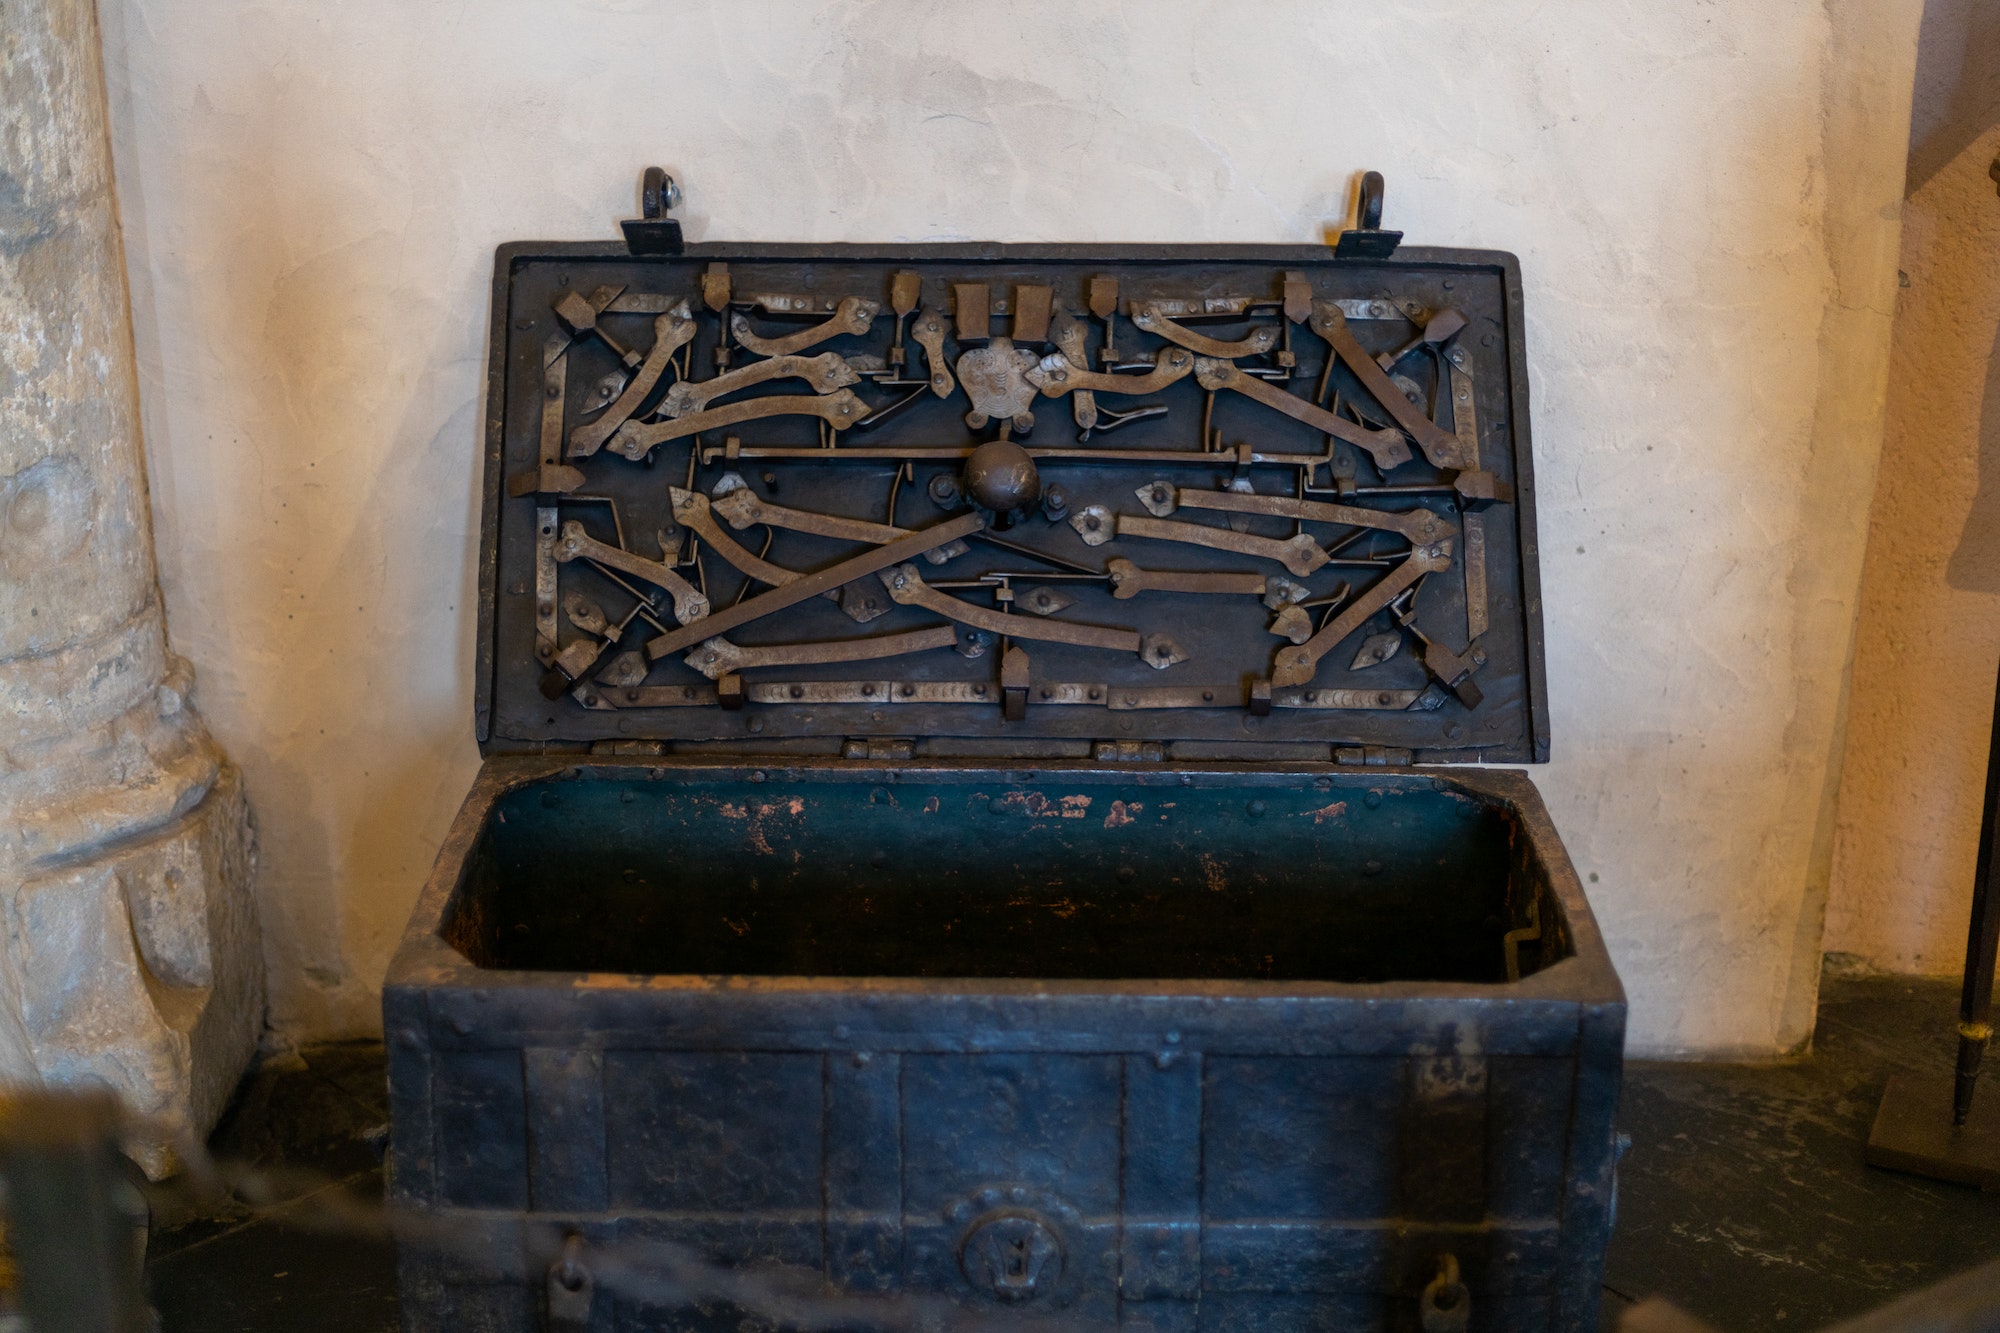 Antique chest with a complex lock in the castle on the floor.